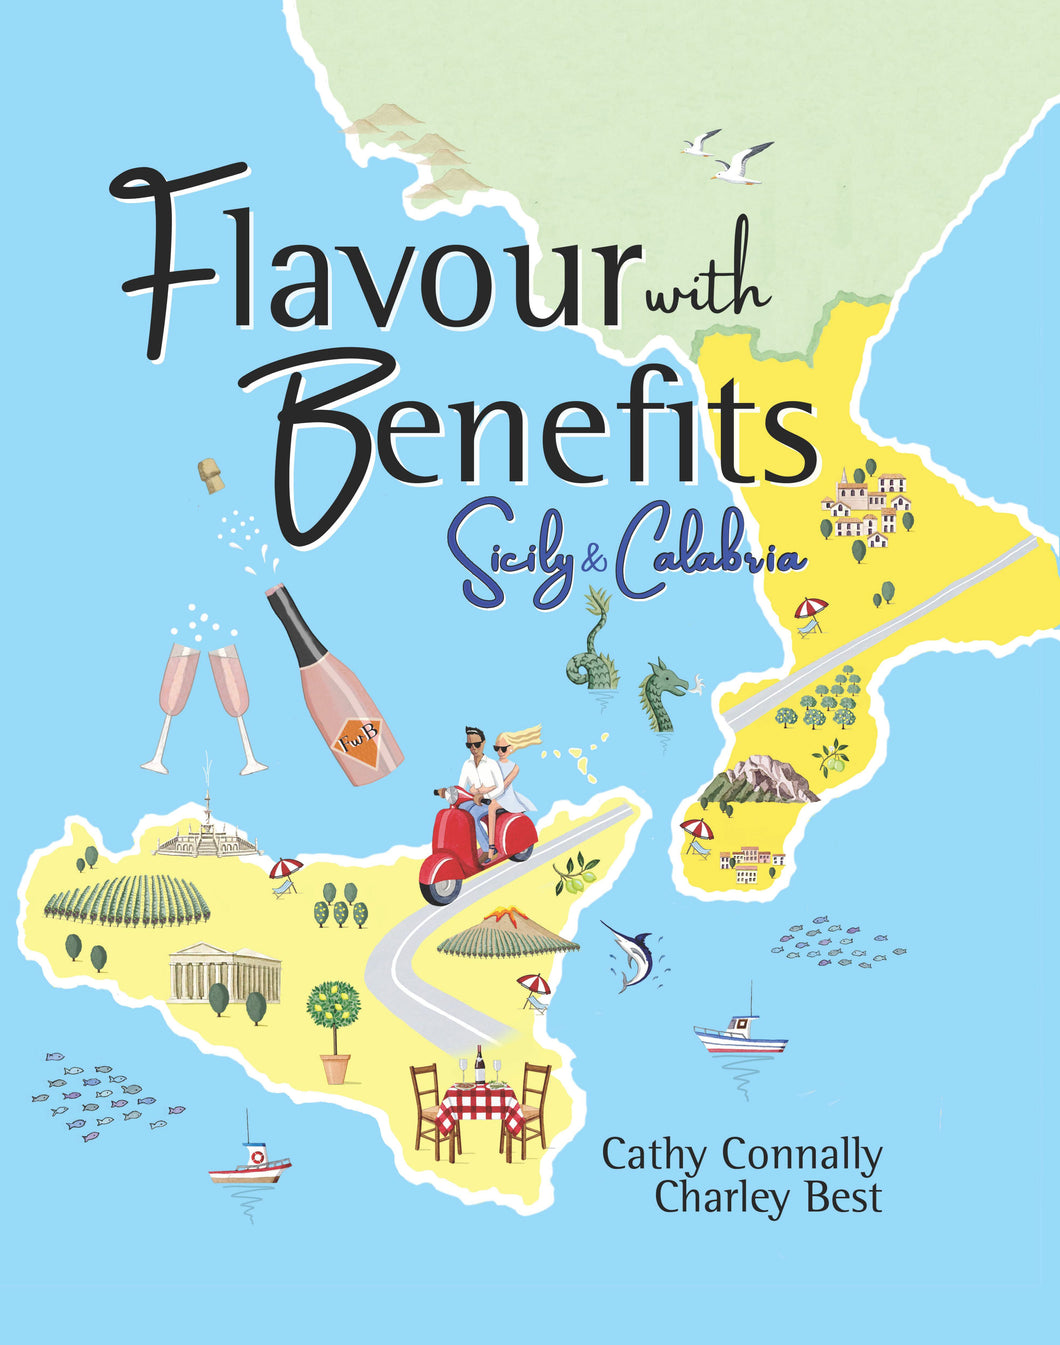 Flavour with Benefits: Sicily & Calabria - Full Case for Wholesale